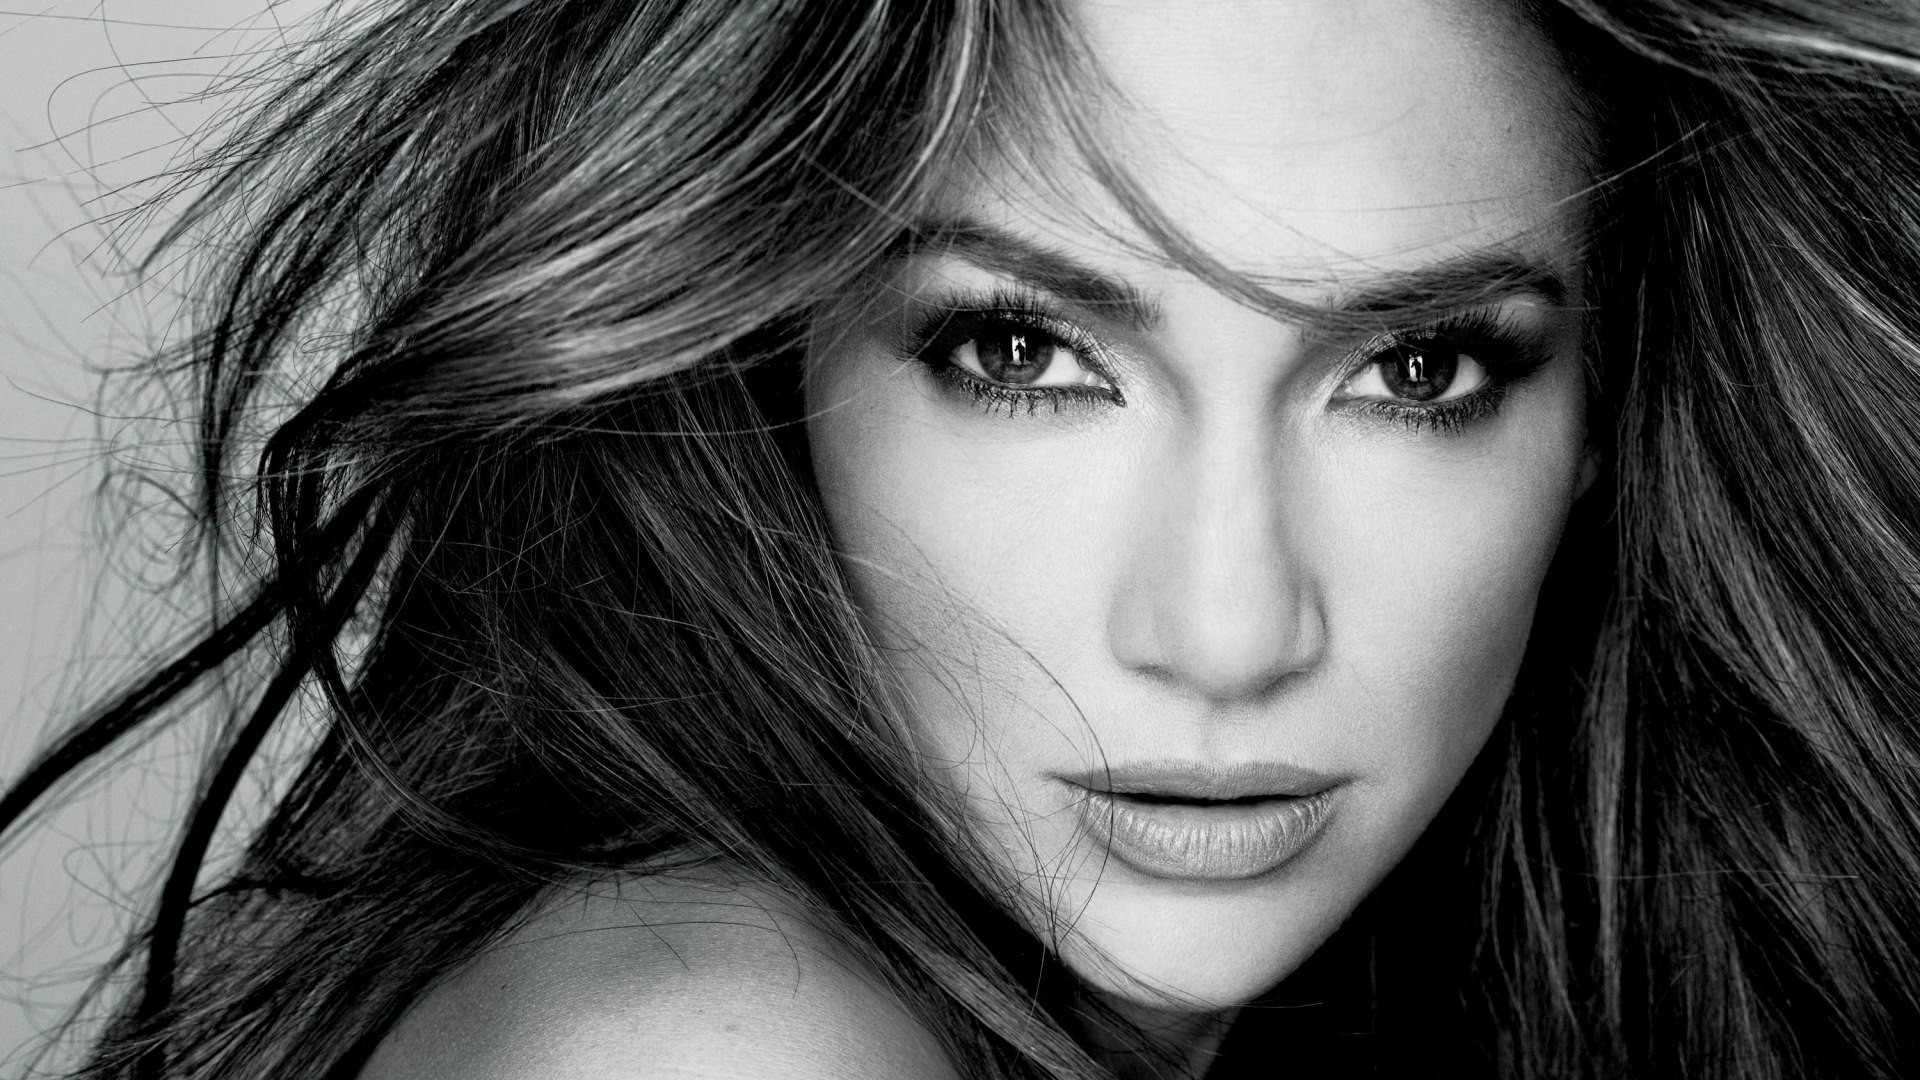 1920x1080 jlo black and white photoshoot - Google Search